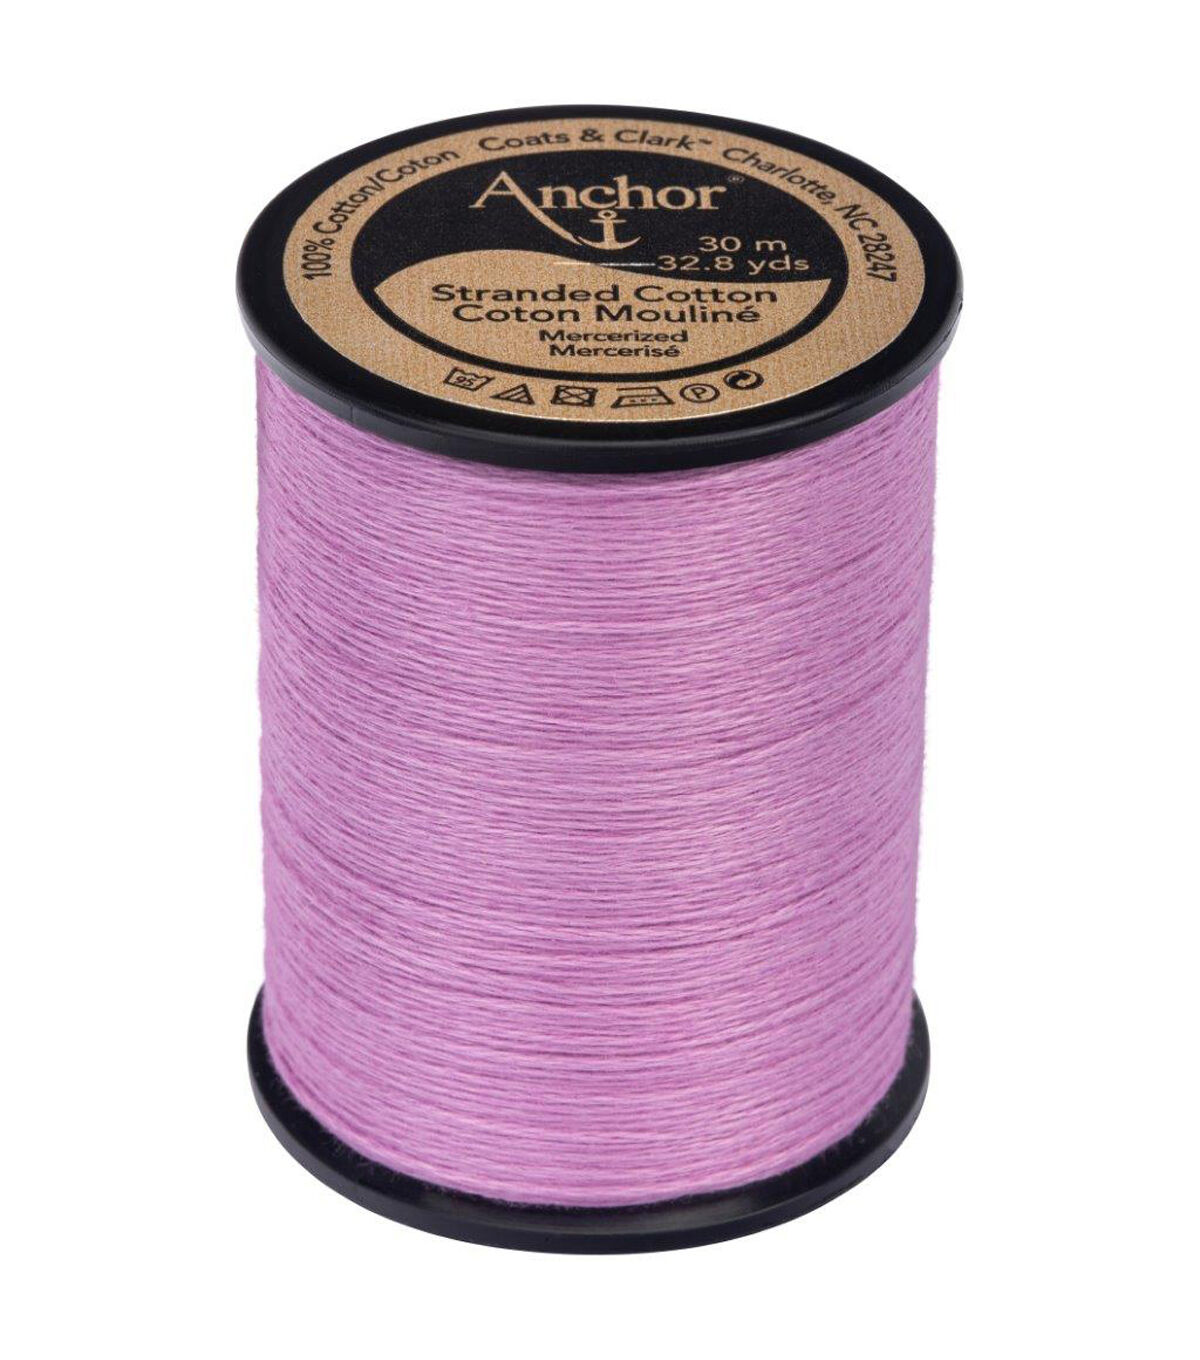 Anchor Cotton 32.8yd Cotton Embroidery Floss | JOANN